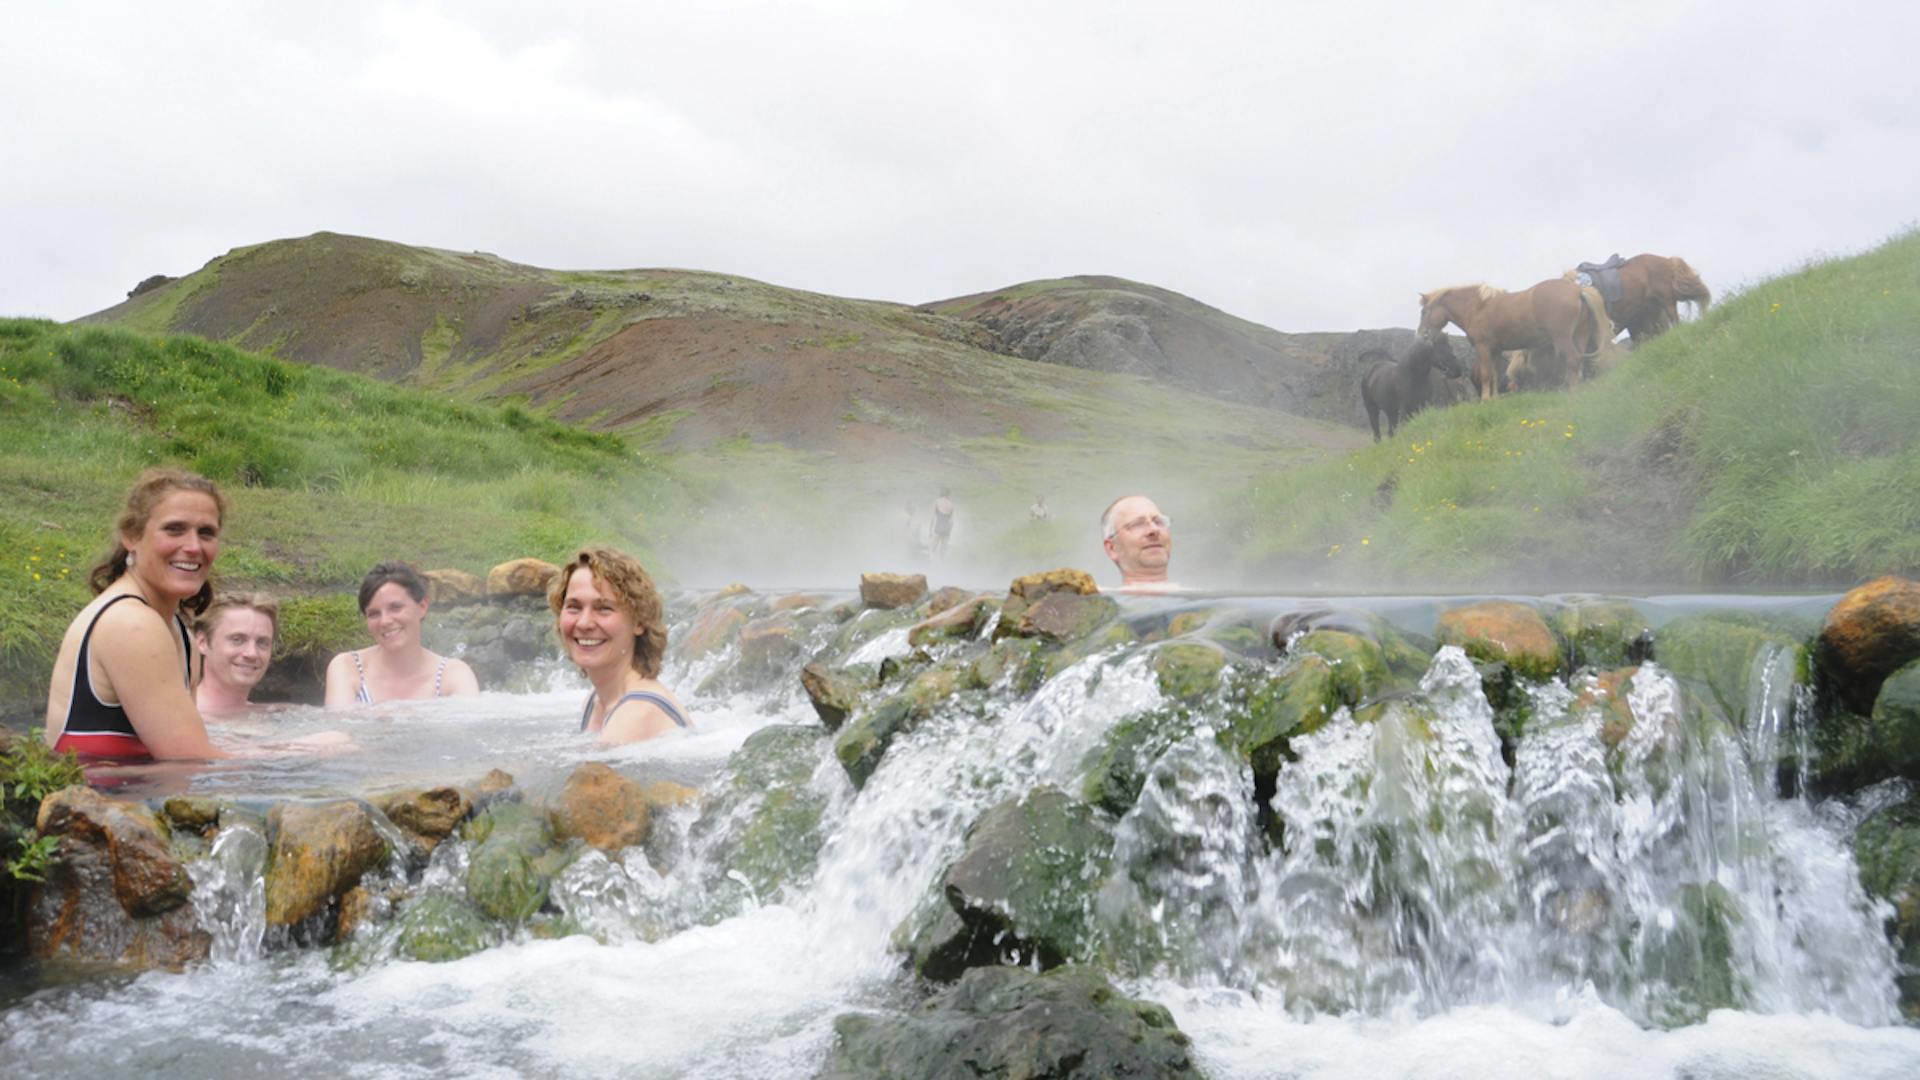 People bathe in a warm geothermal river with horses in the background.